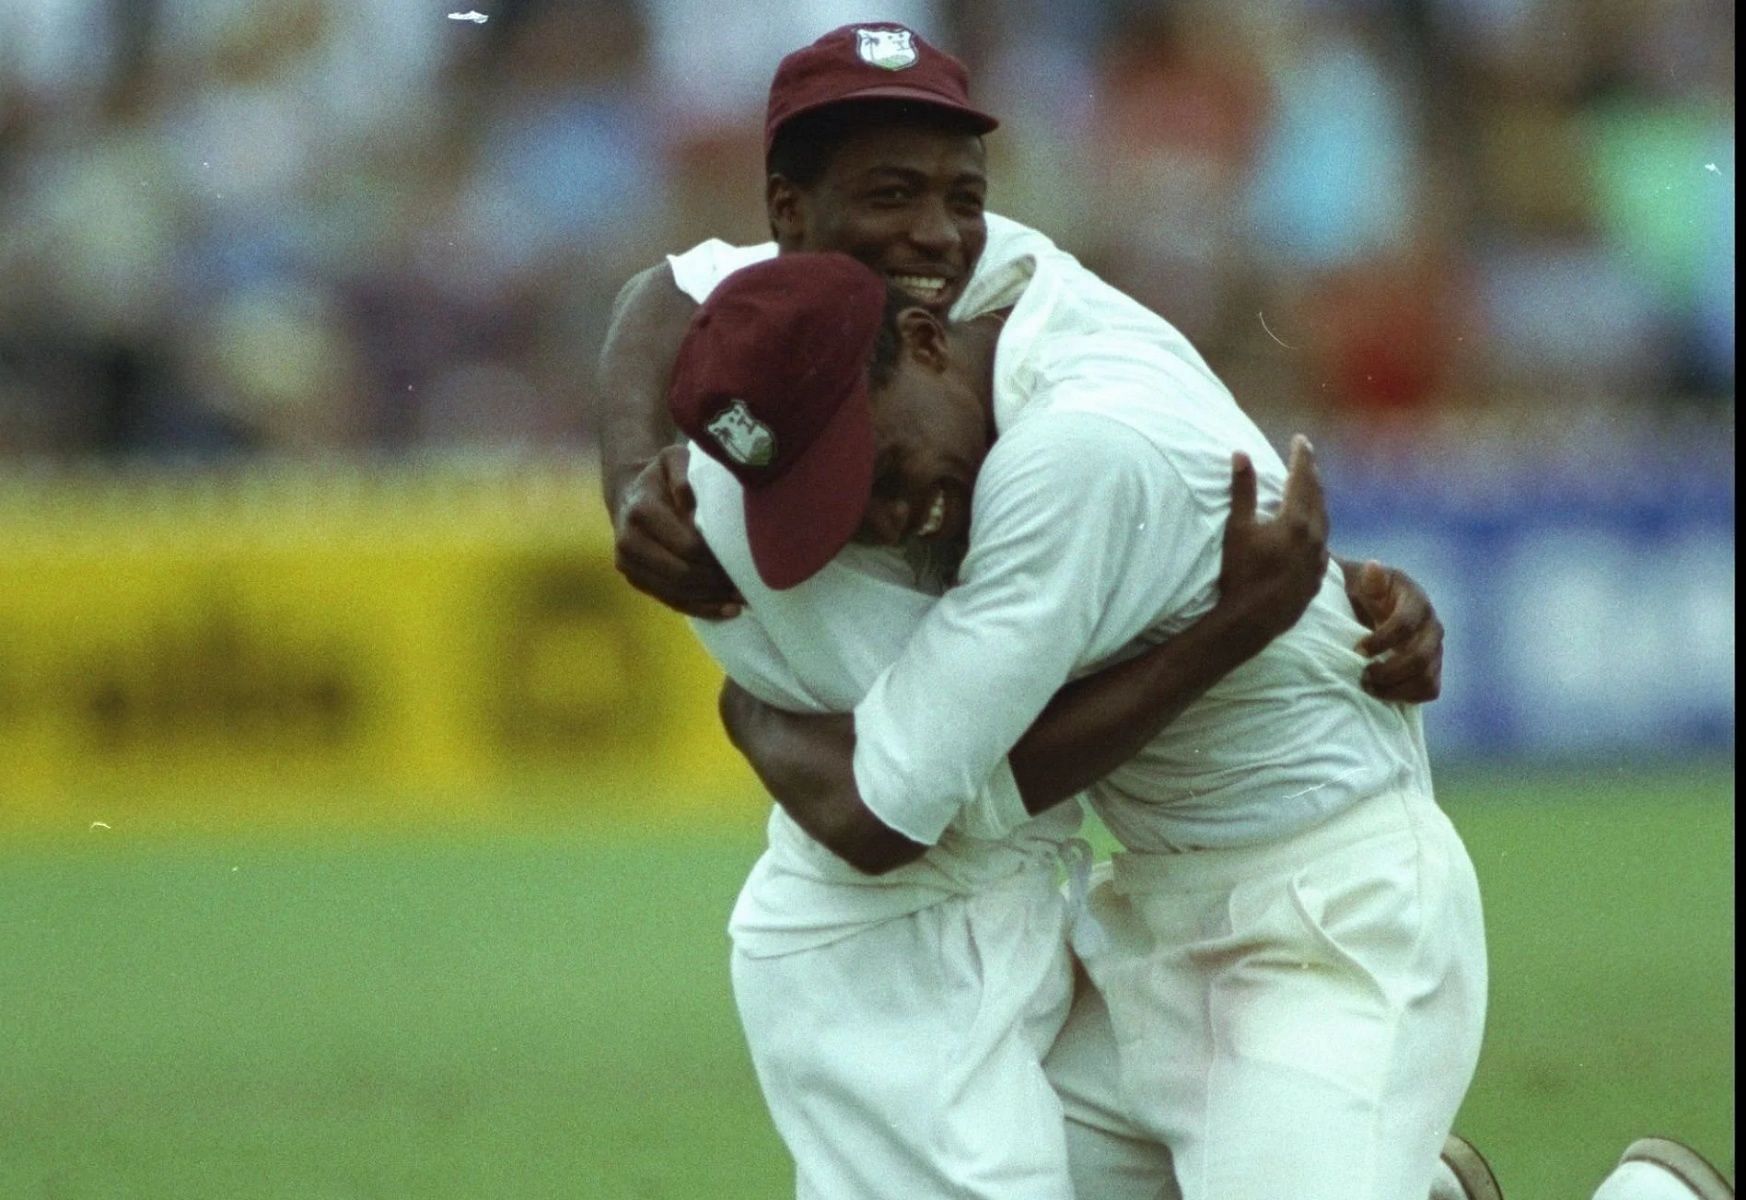 Windies players celebrate their one-run win in Adelaide in 1993. (Pic: Getty Images)